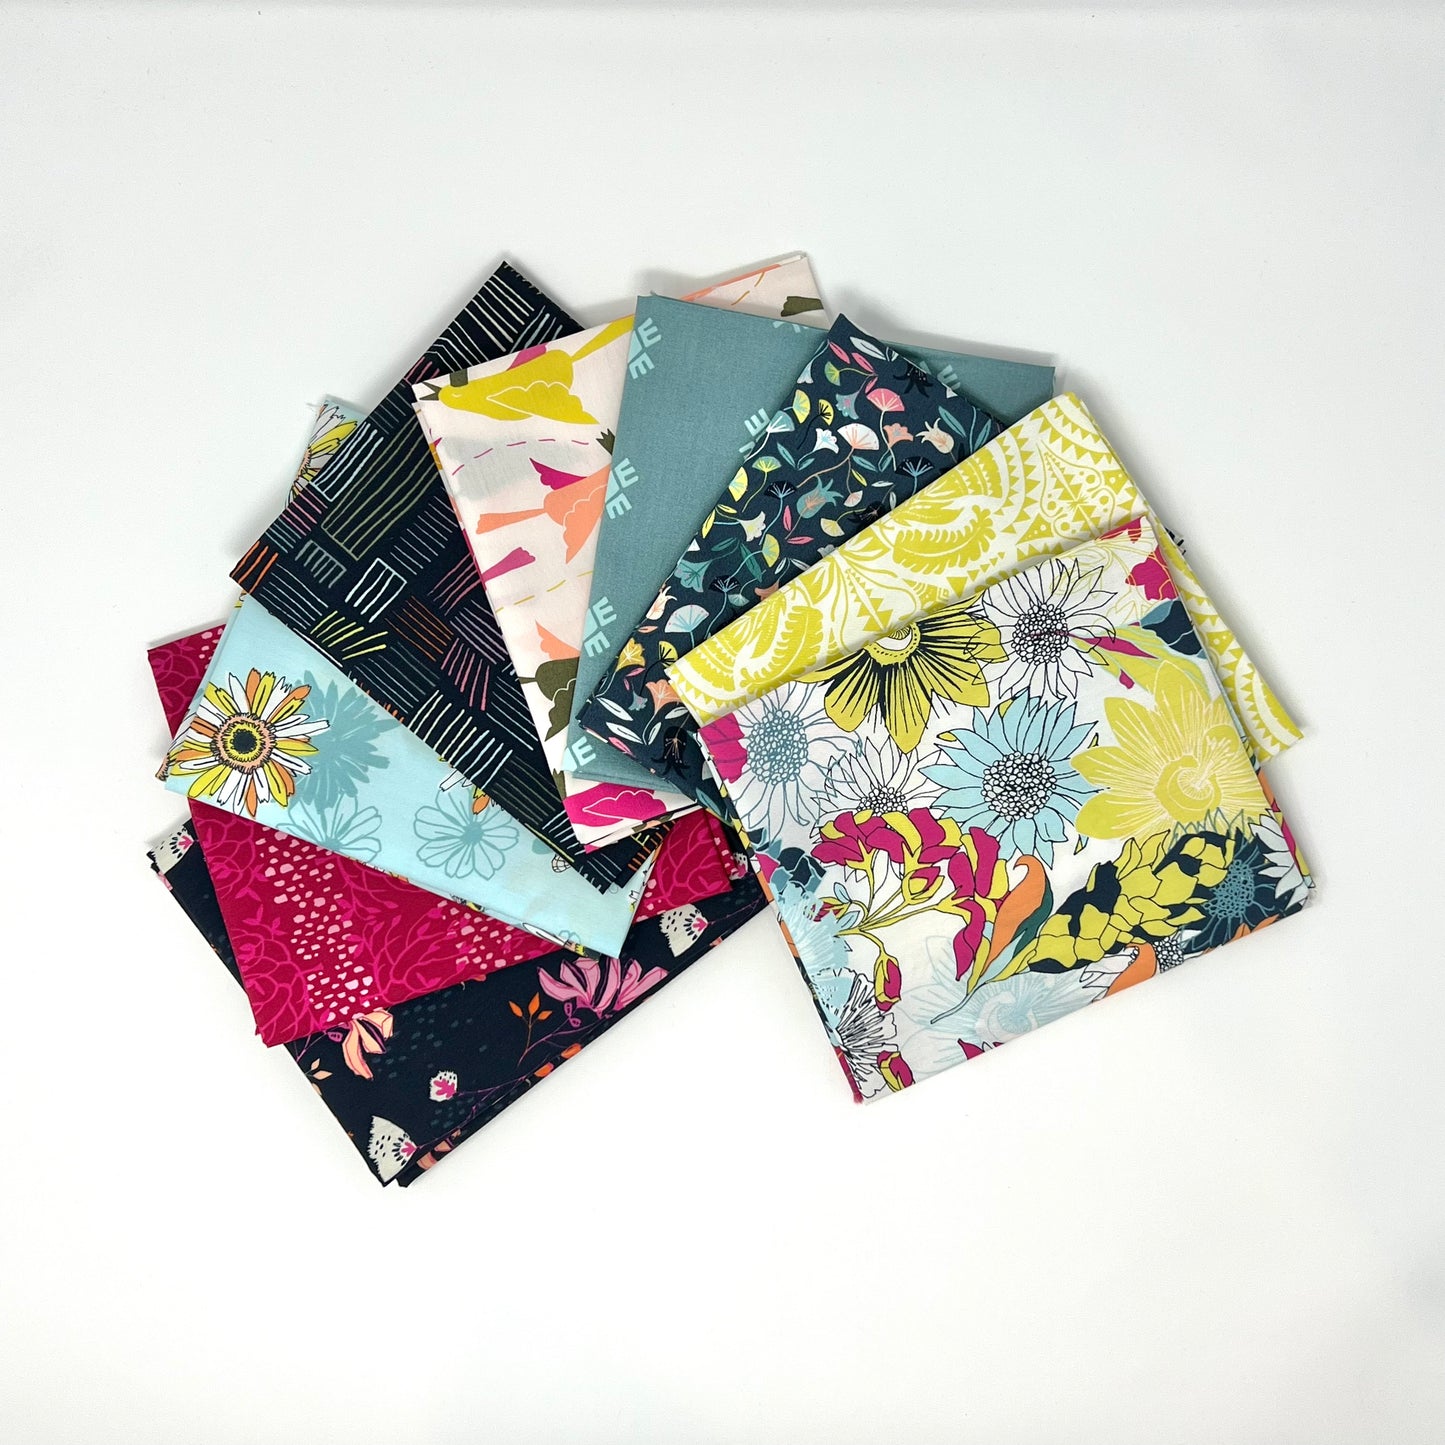 AGF Jessica Swift Pollinate Collection, 10 FQ Fabric Bundle